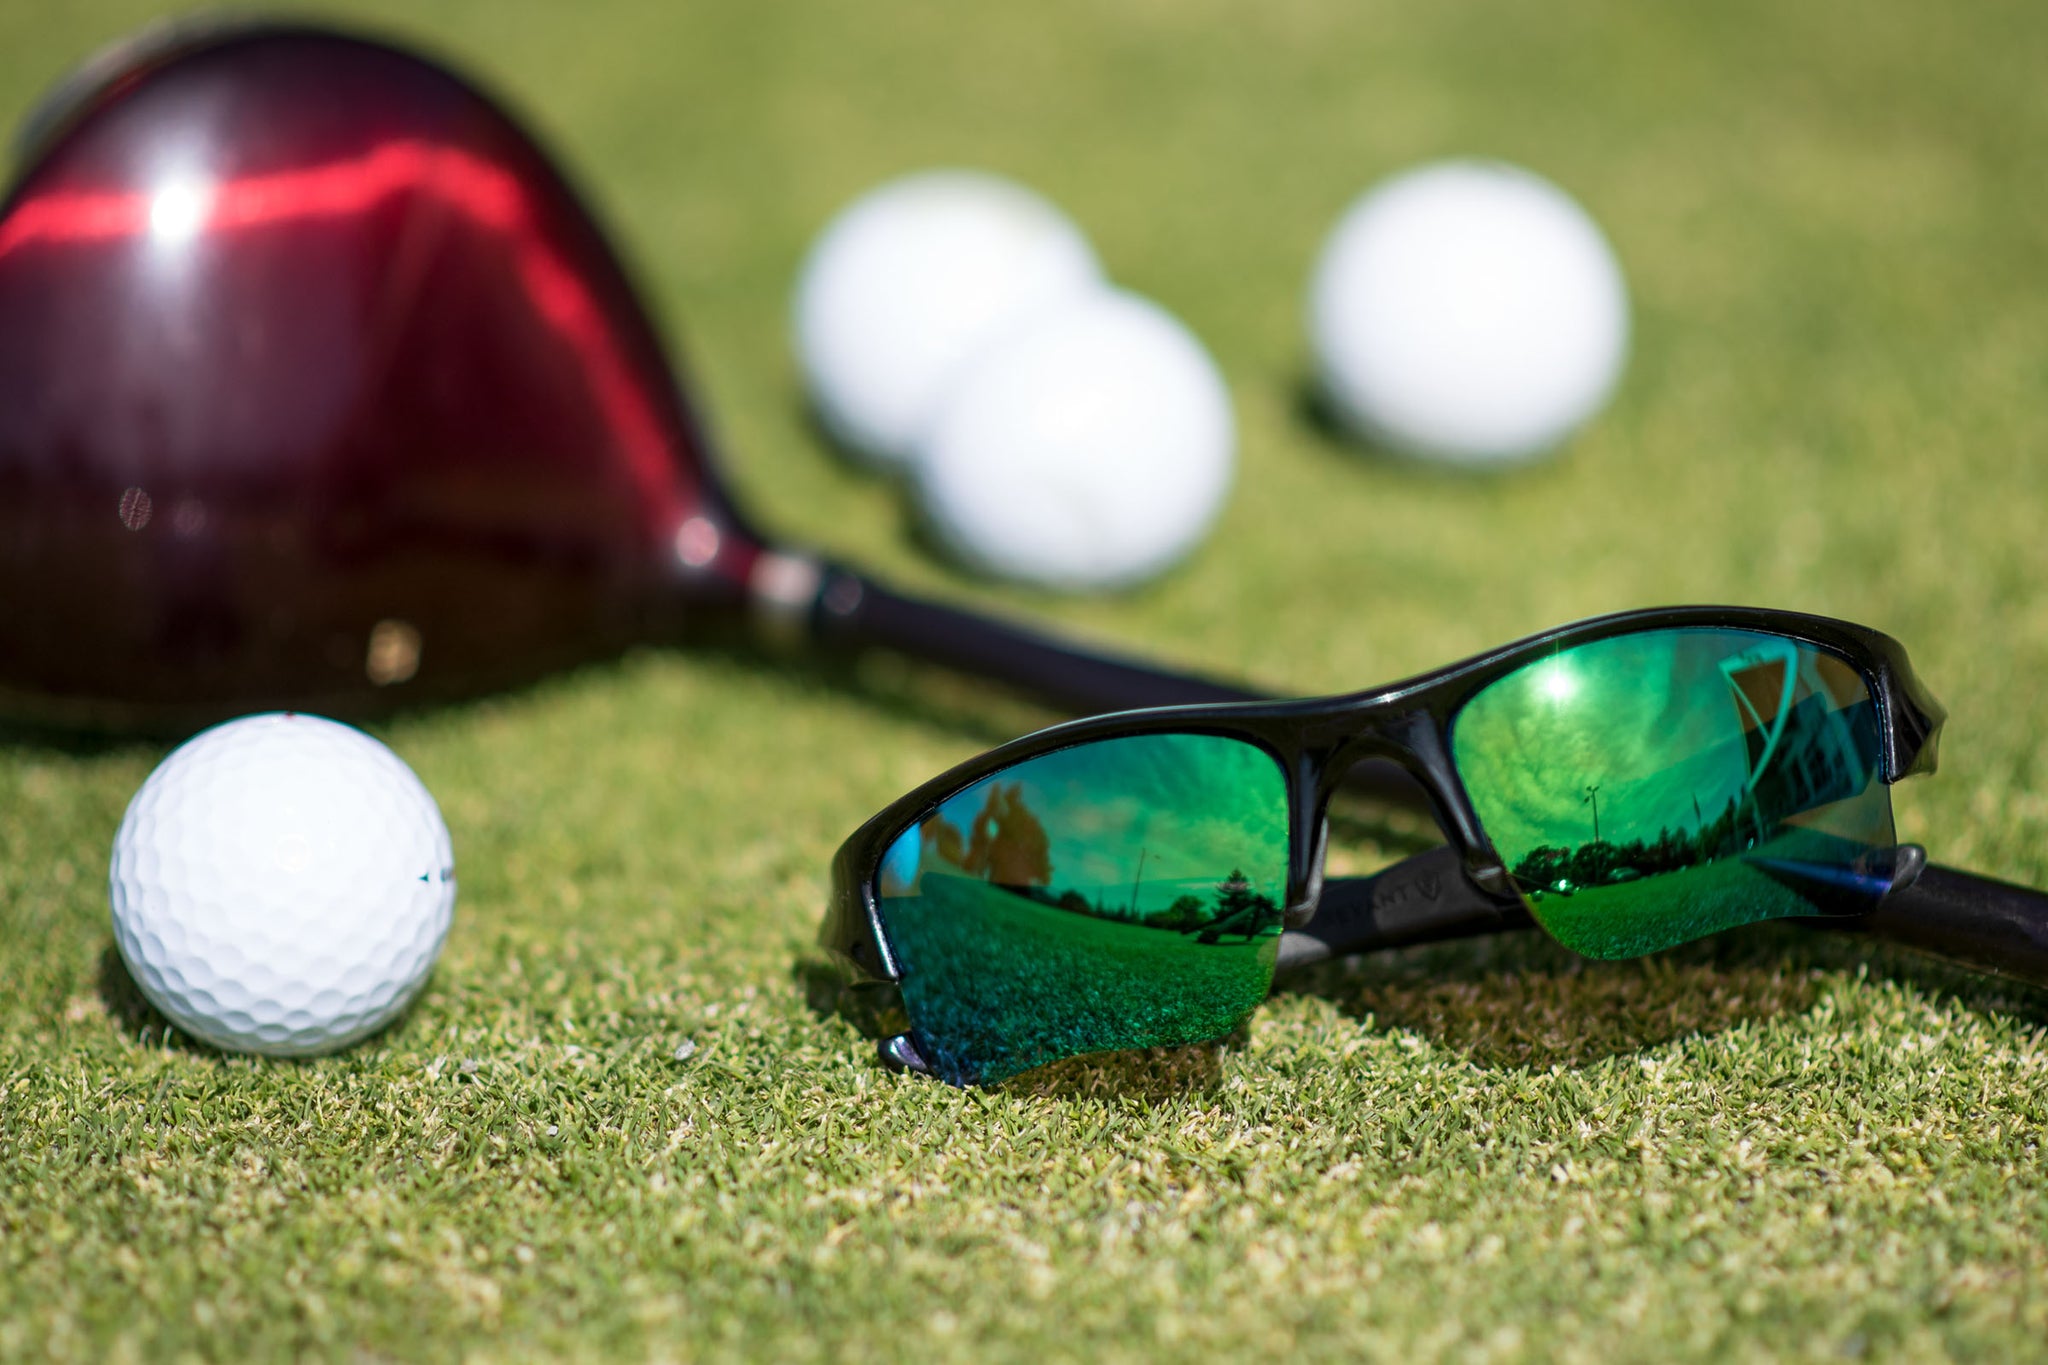 Oakley Flak Jacket XLJ sunglasses with Emerald Green replacement lenses on a golf course with clubs and golf balls